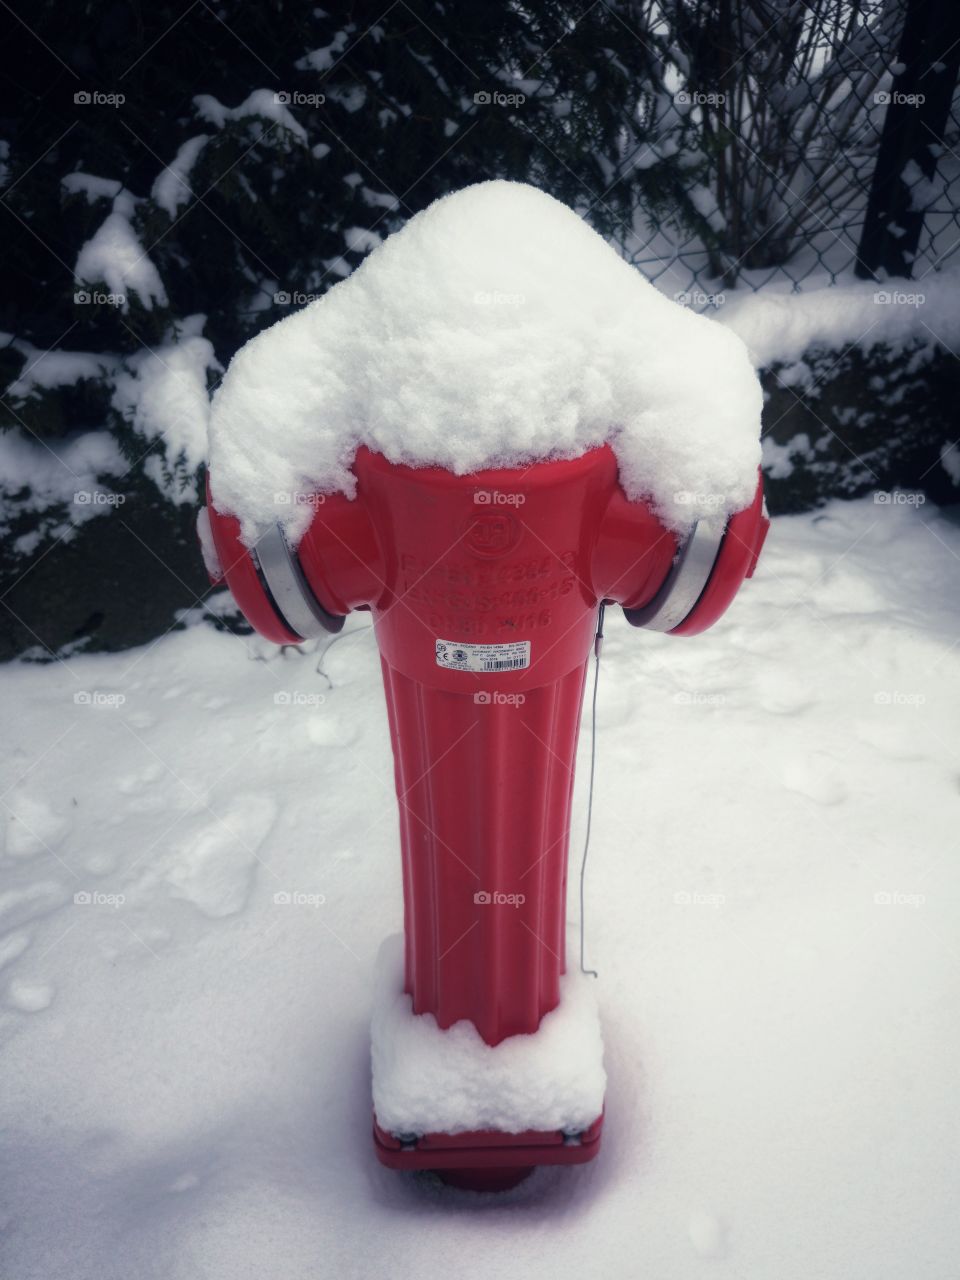 Red hydrant in the middle of winter